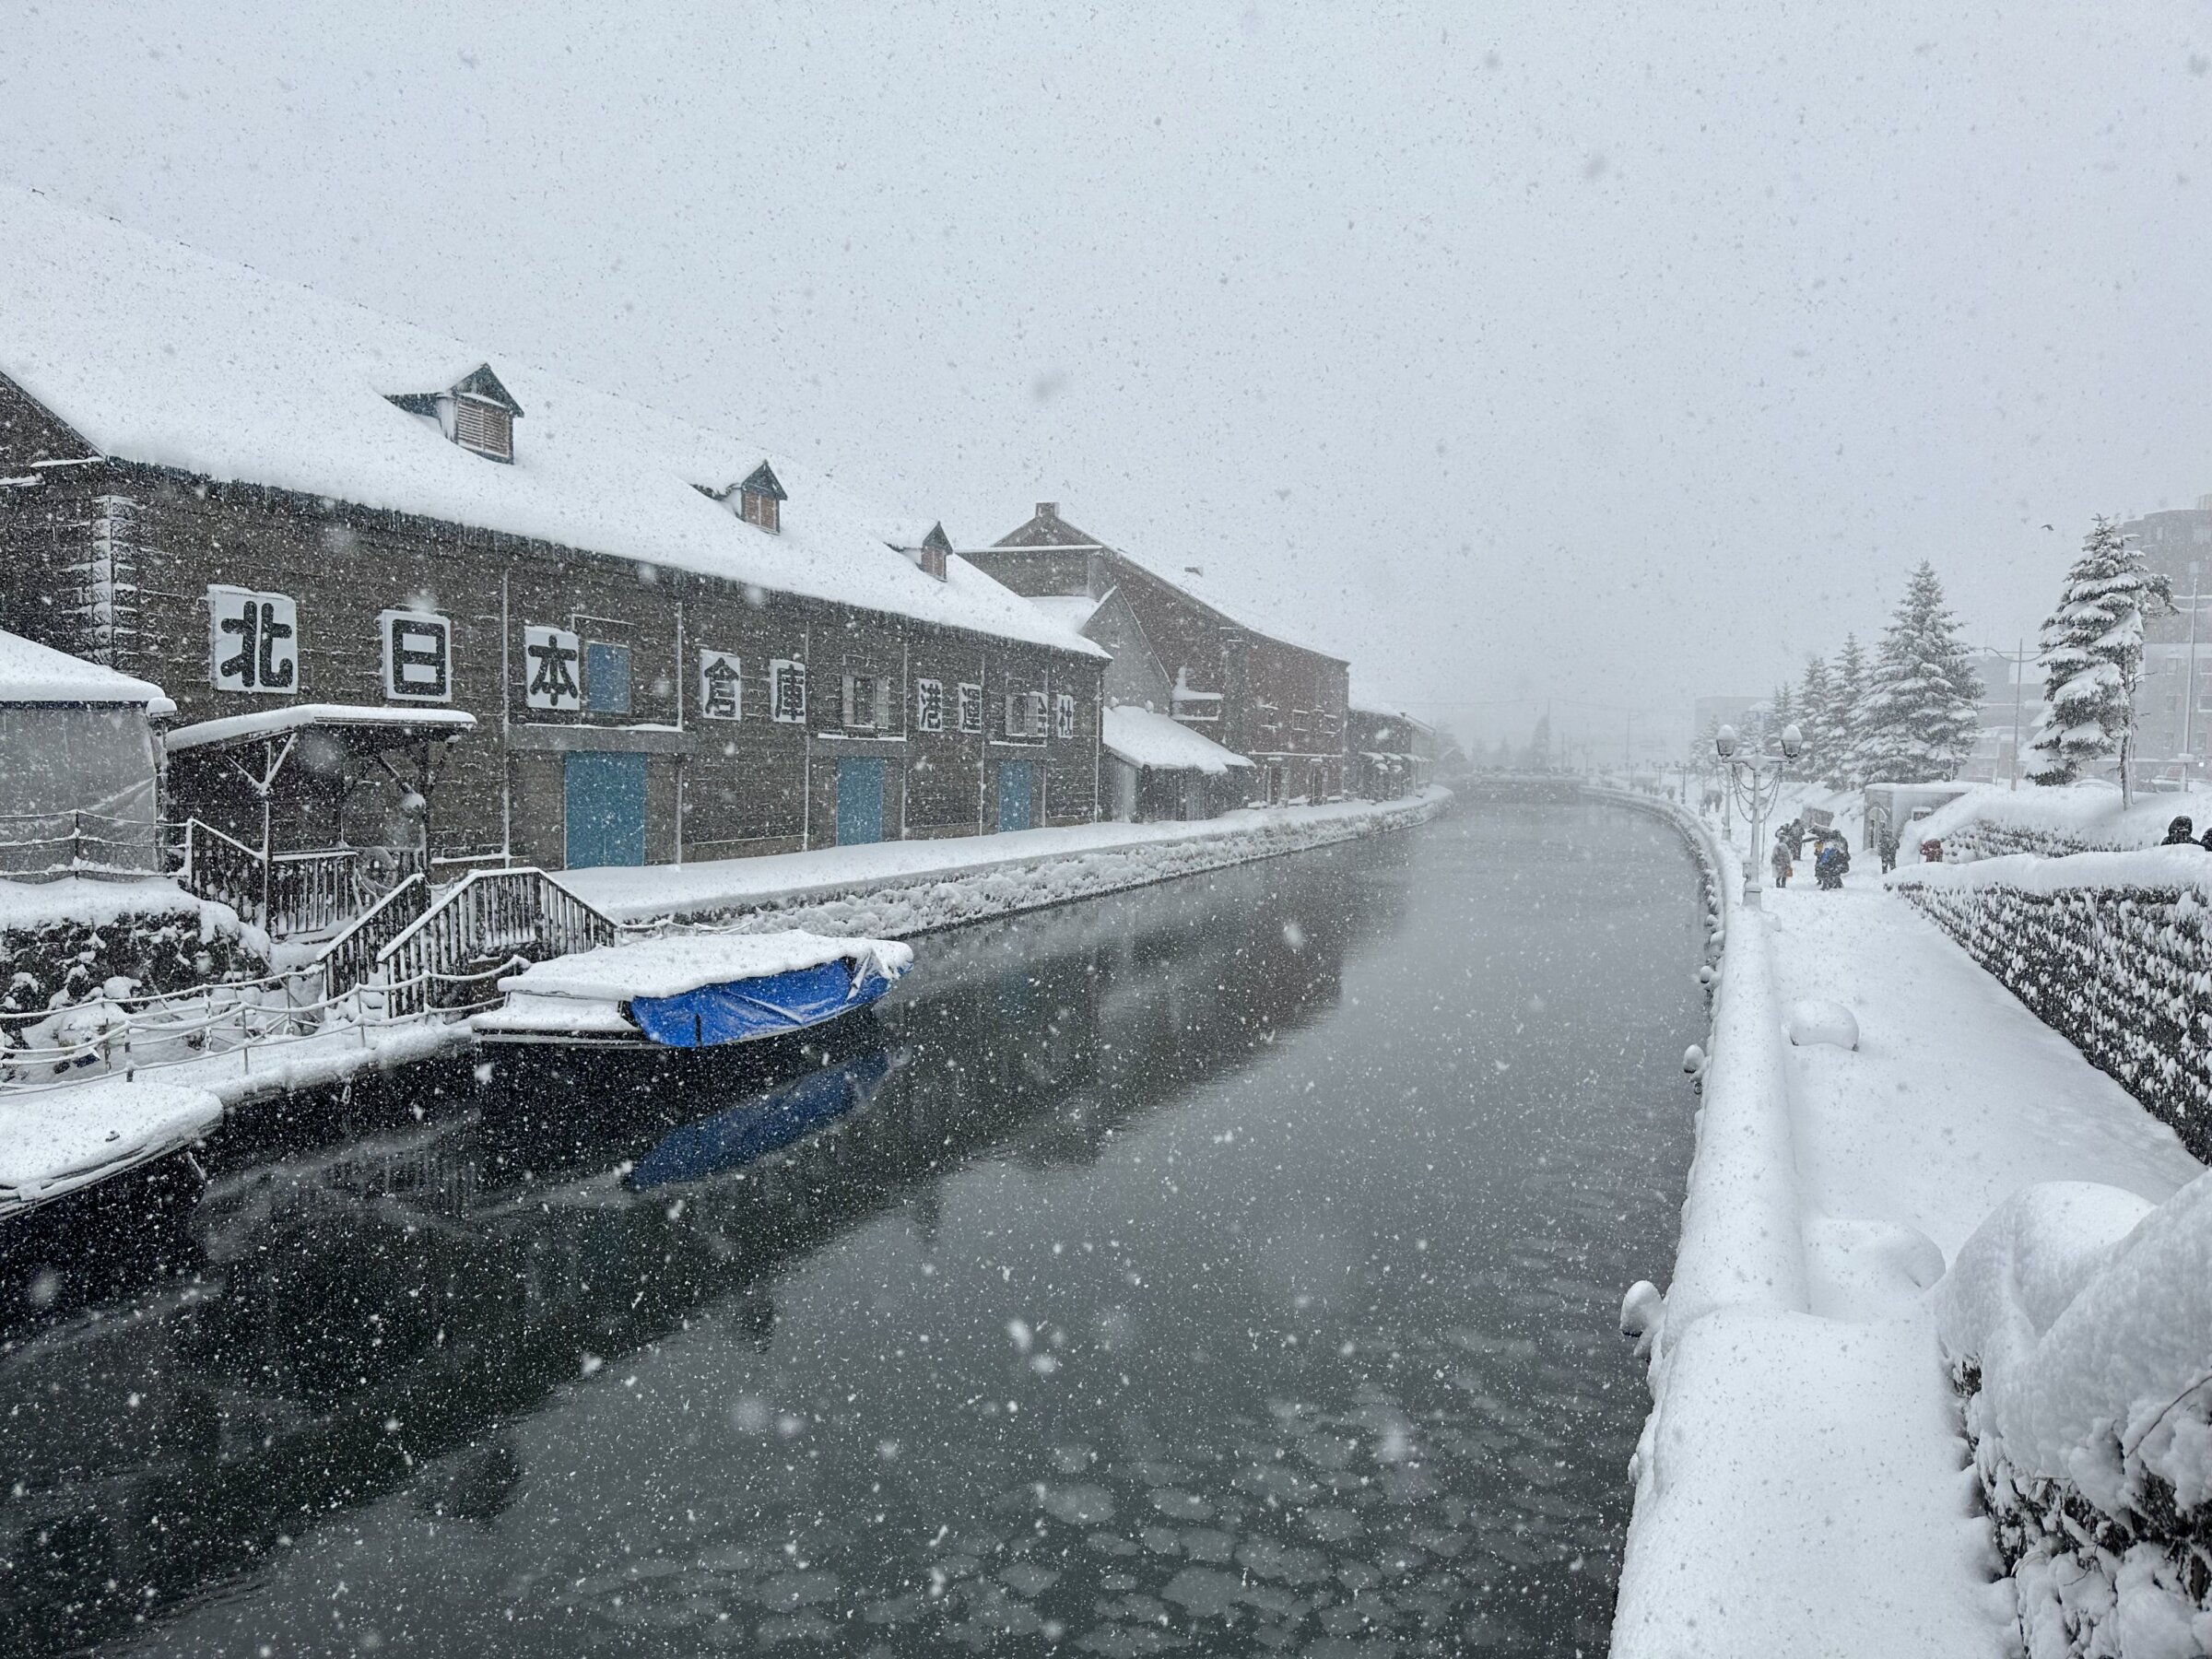 A snowy canal in Japan with dark water and short buildings during a guided Japan ski trip with Alpenglow Expeditions.